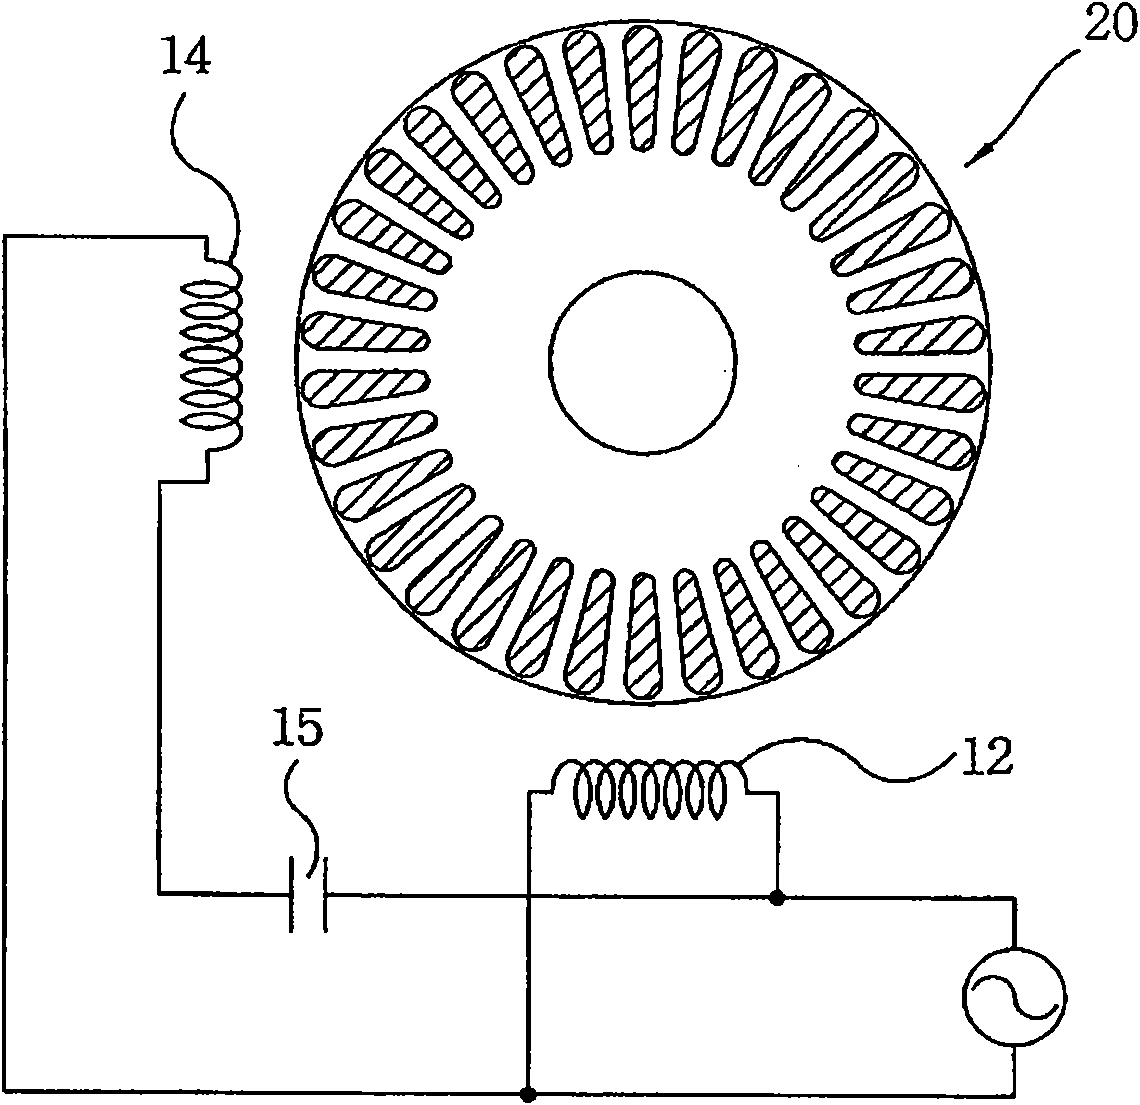 Motor, compressor and air conditioning system having the same